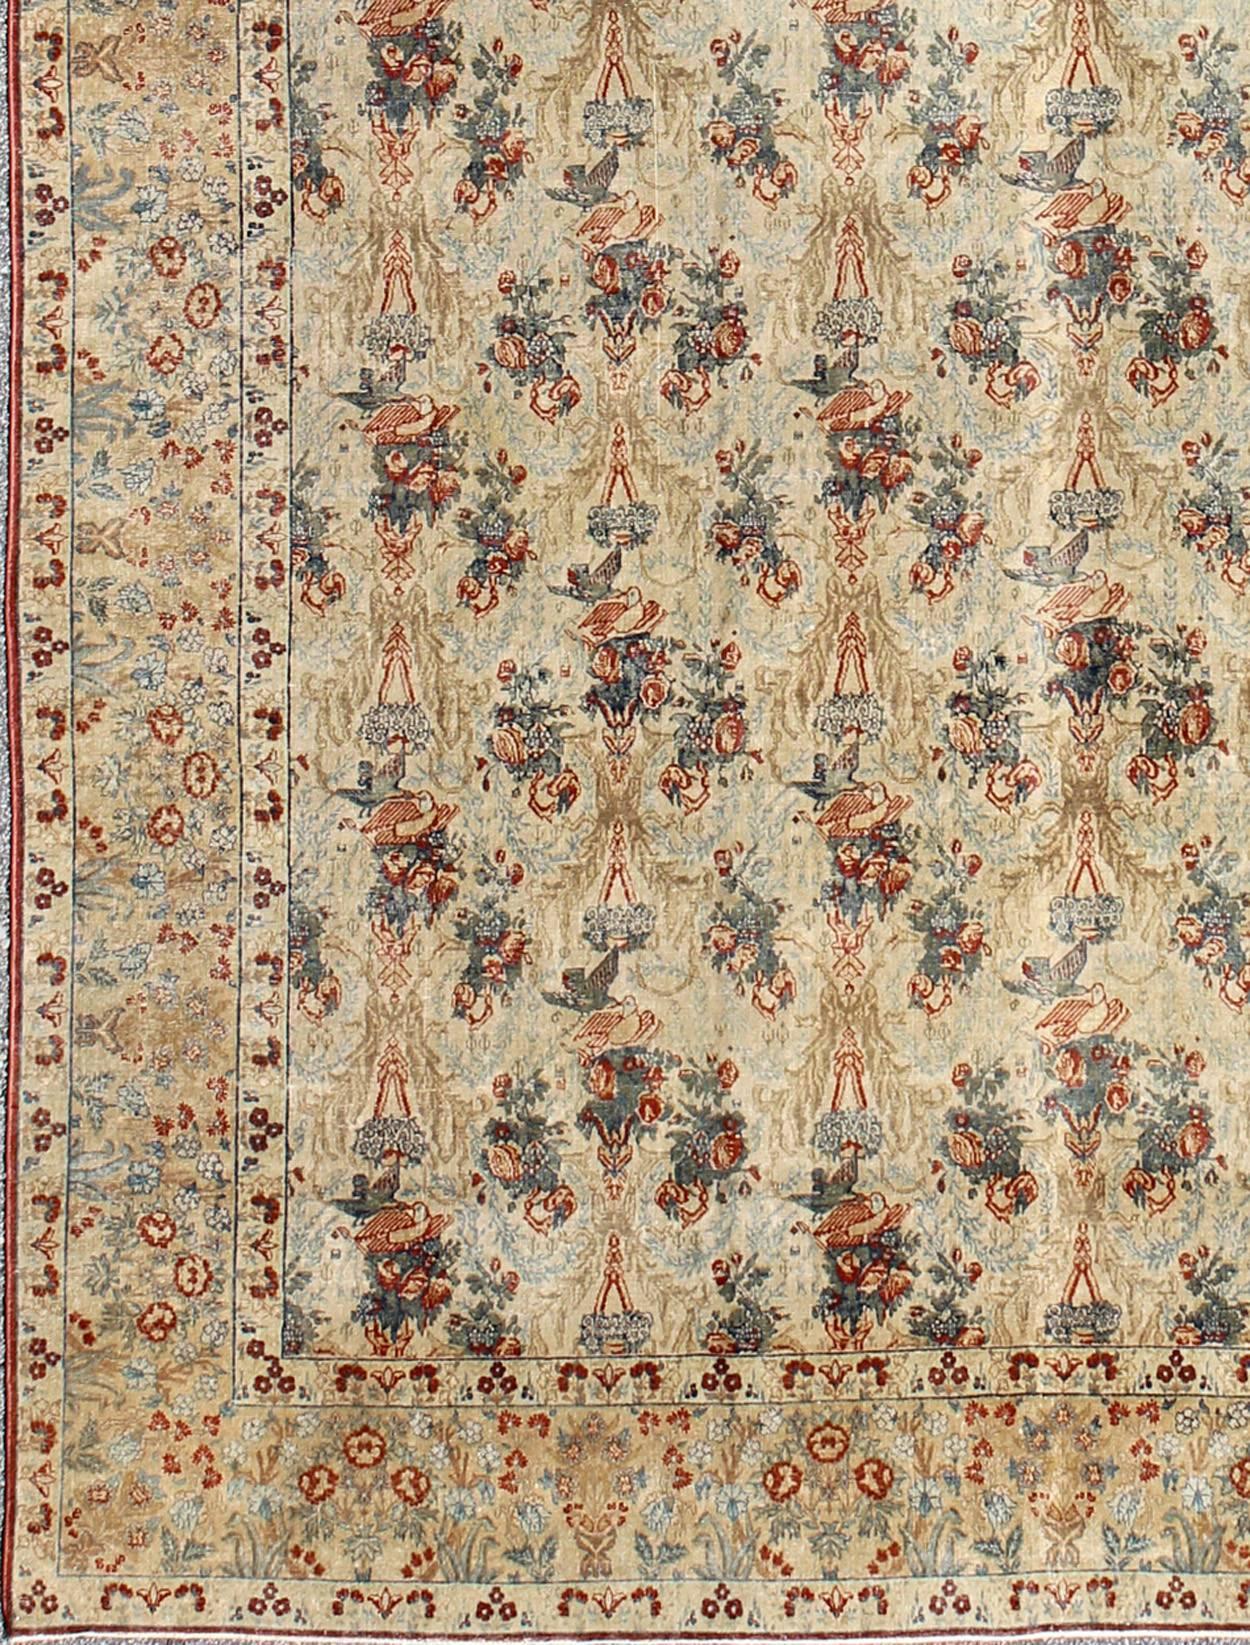 Large antique fine Tabriz Persian carpet in ivory background with flowers and bird design. Keivan Woven Arts / rug /E-0609. Antique fine Persian rug, Haj Jalili Tabriz Persian rug. Fine Persian Tabriz
This unique all-over pattern finely woven